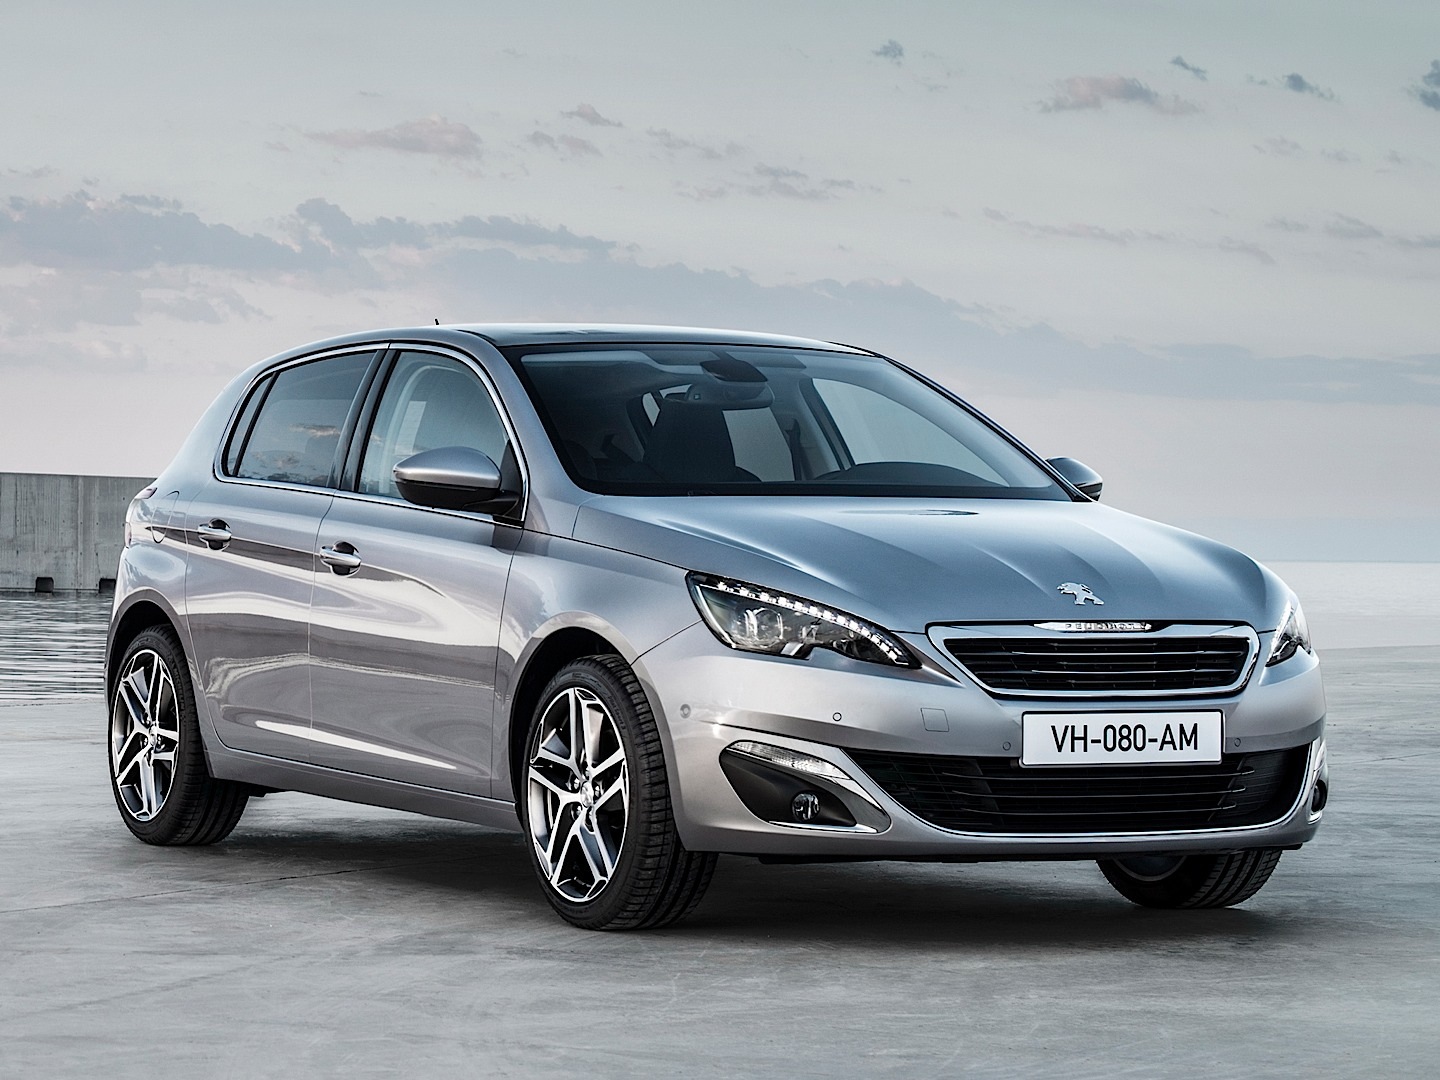 fresh-2014-peugeot-308-photos-leaked-shed-new-light-on-french-compact-photo-gallery-65722_1